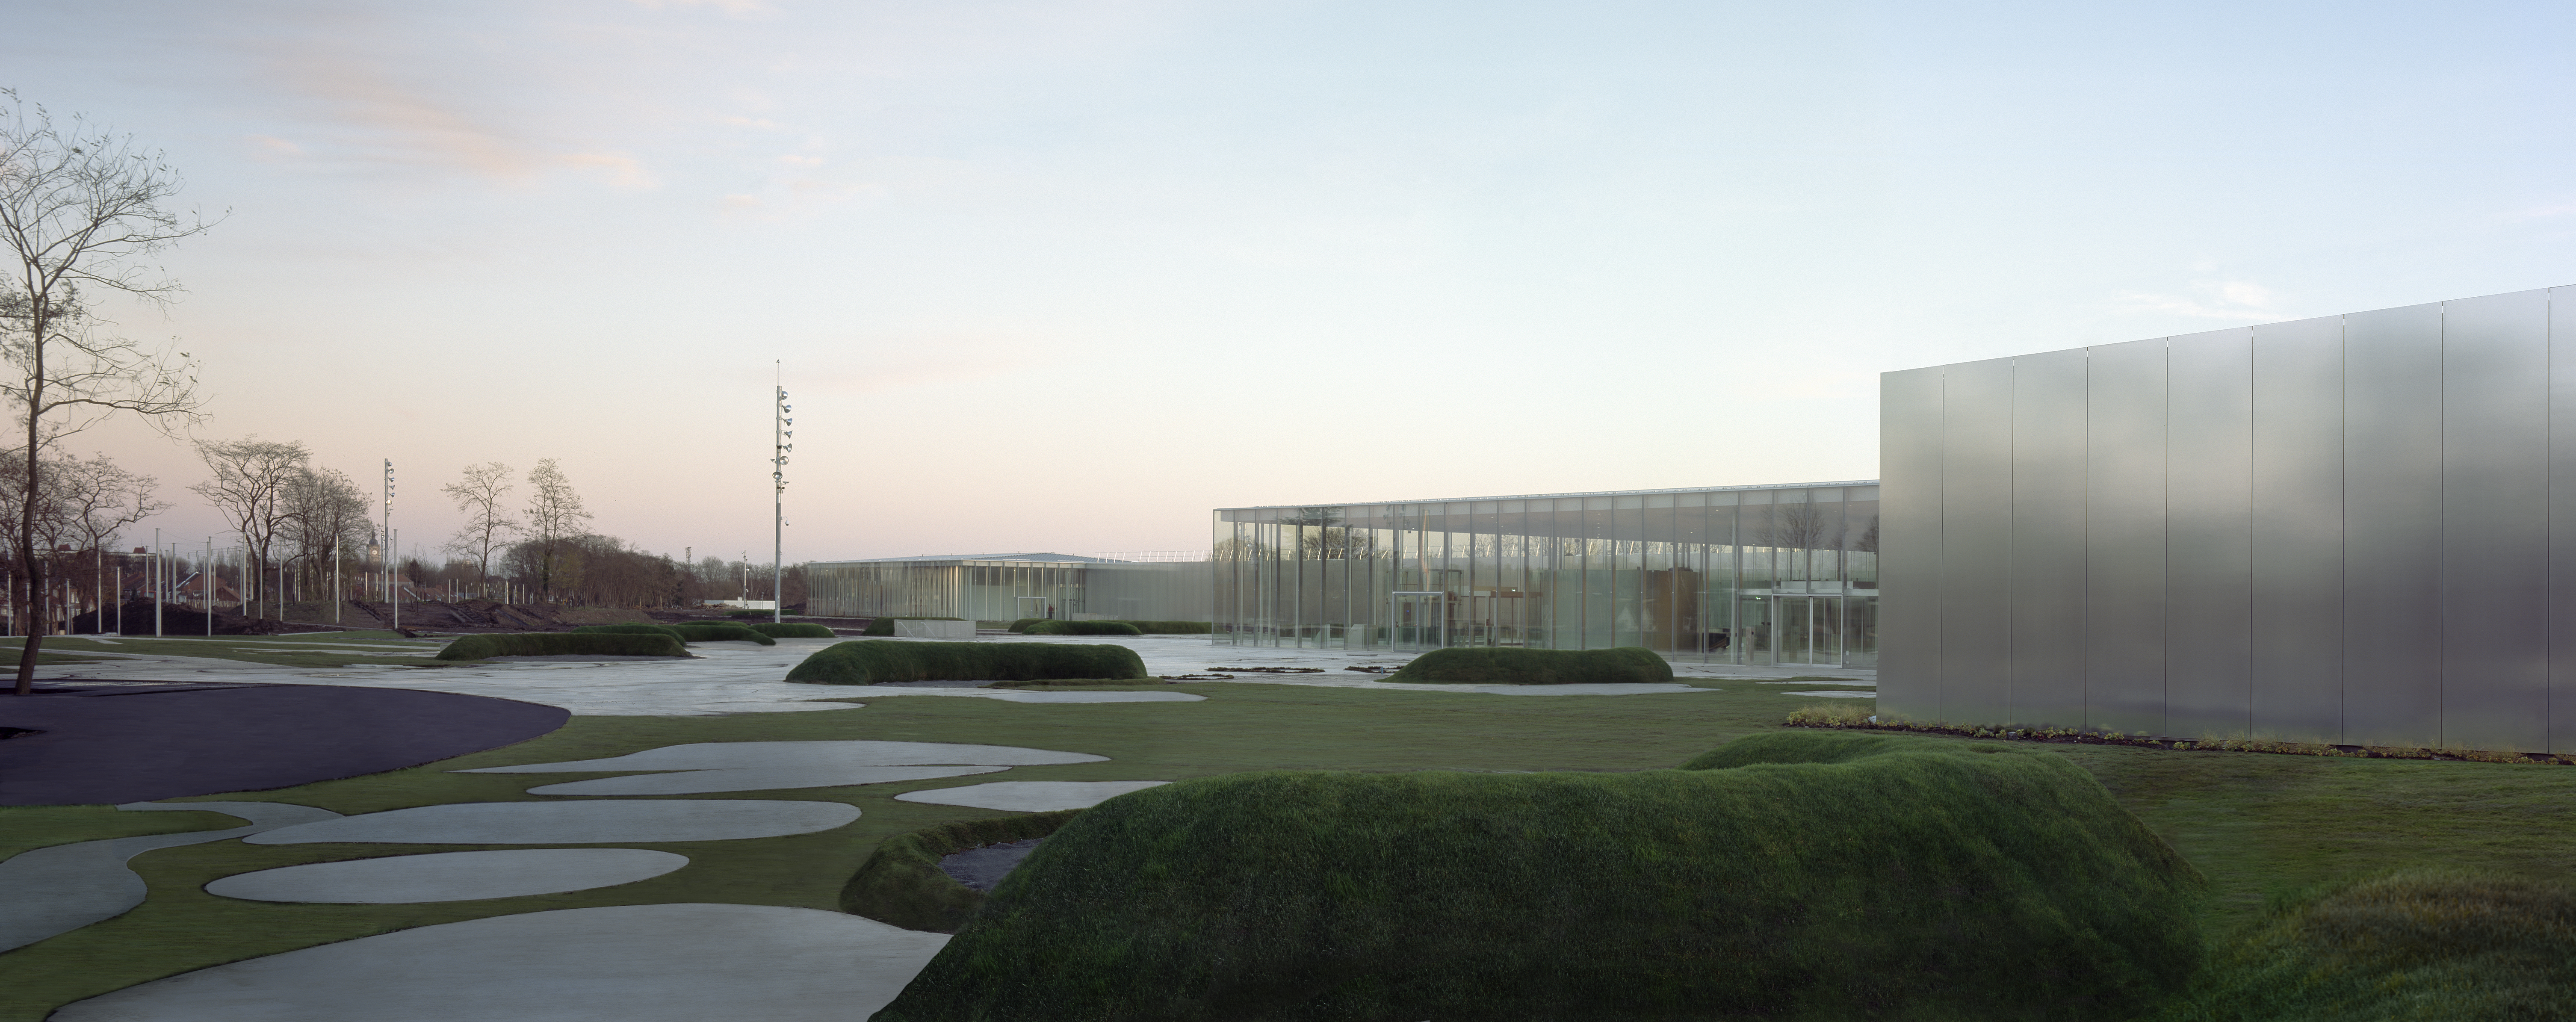 Project of the week "Louvre-Lens": Local development through a strong and ambitious cultural programme